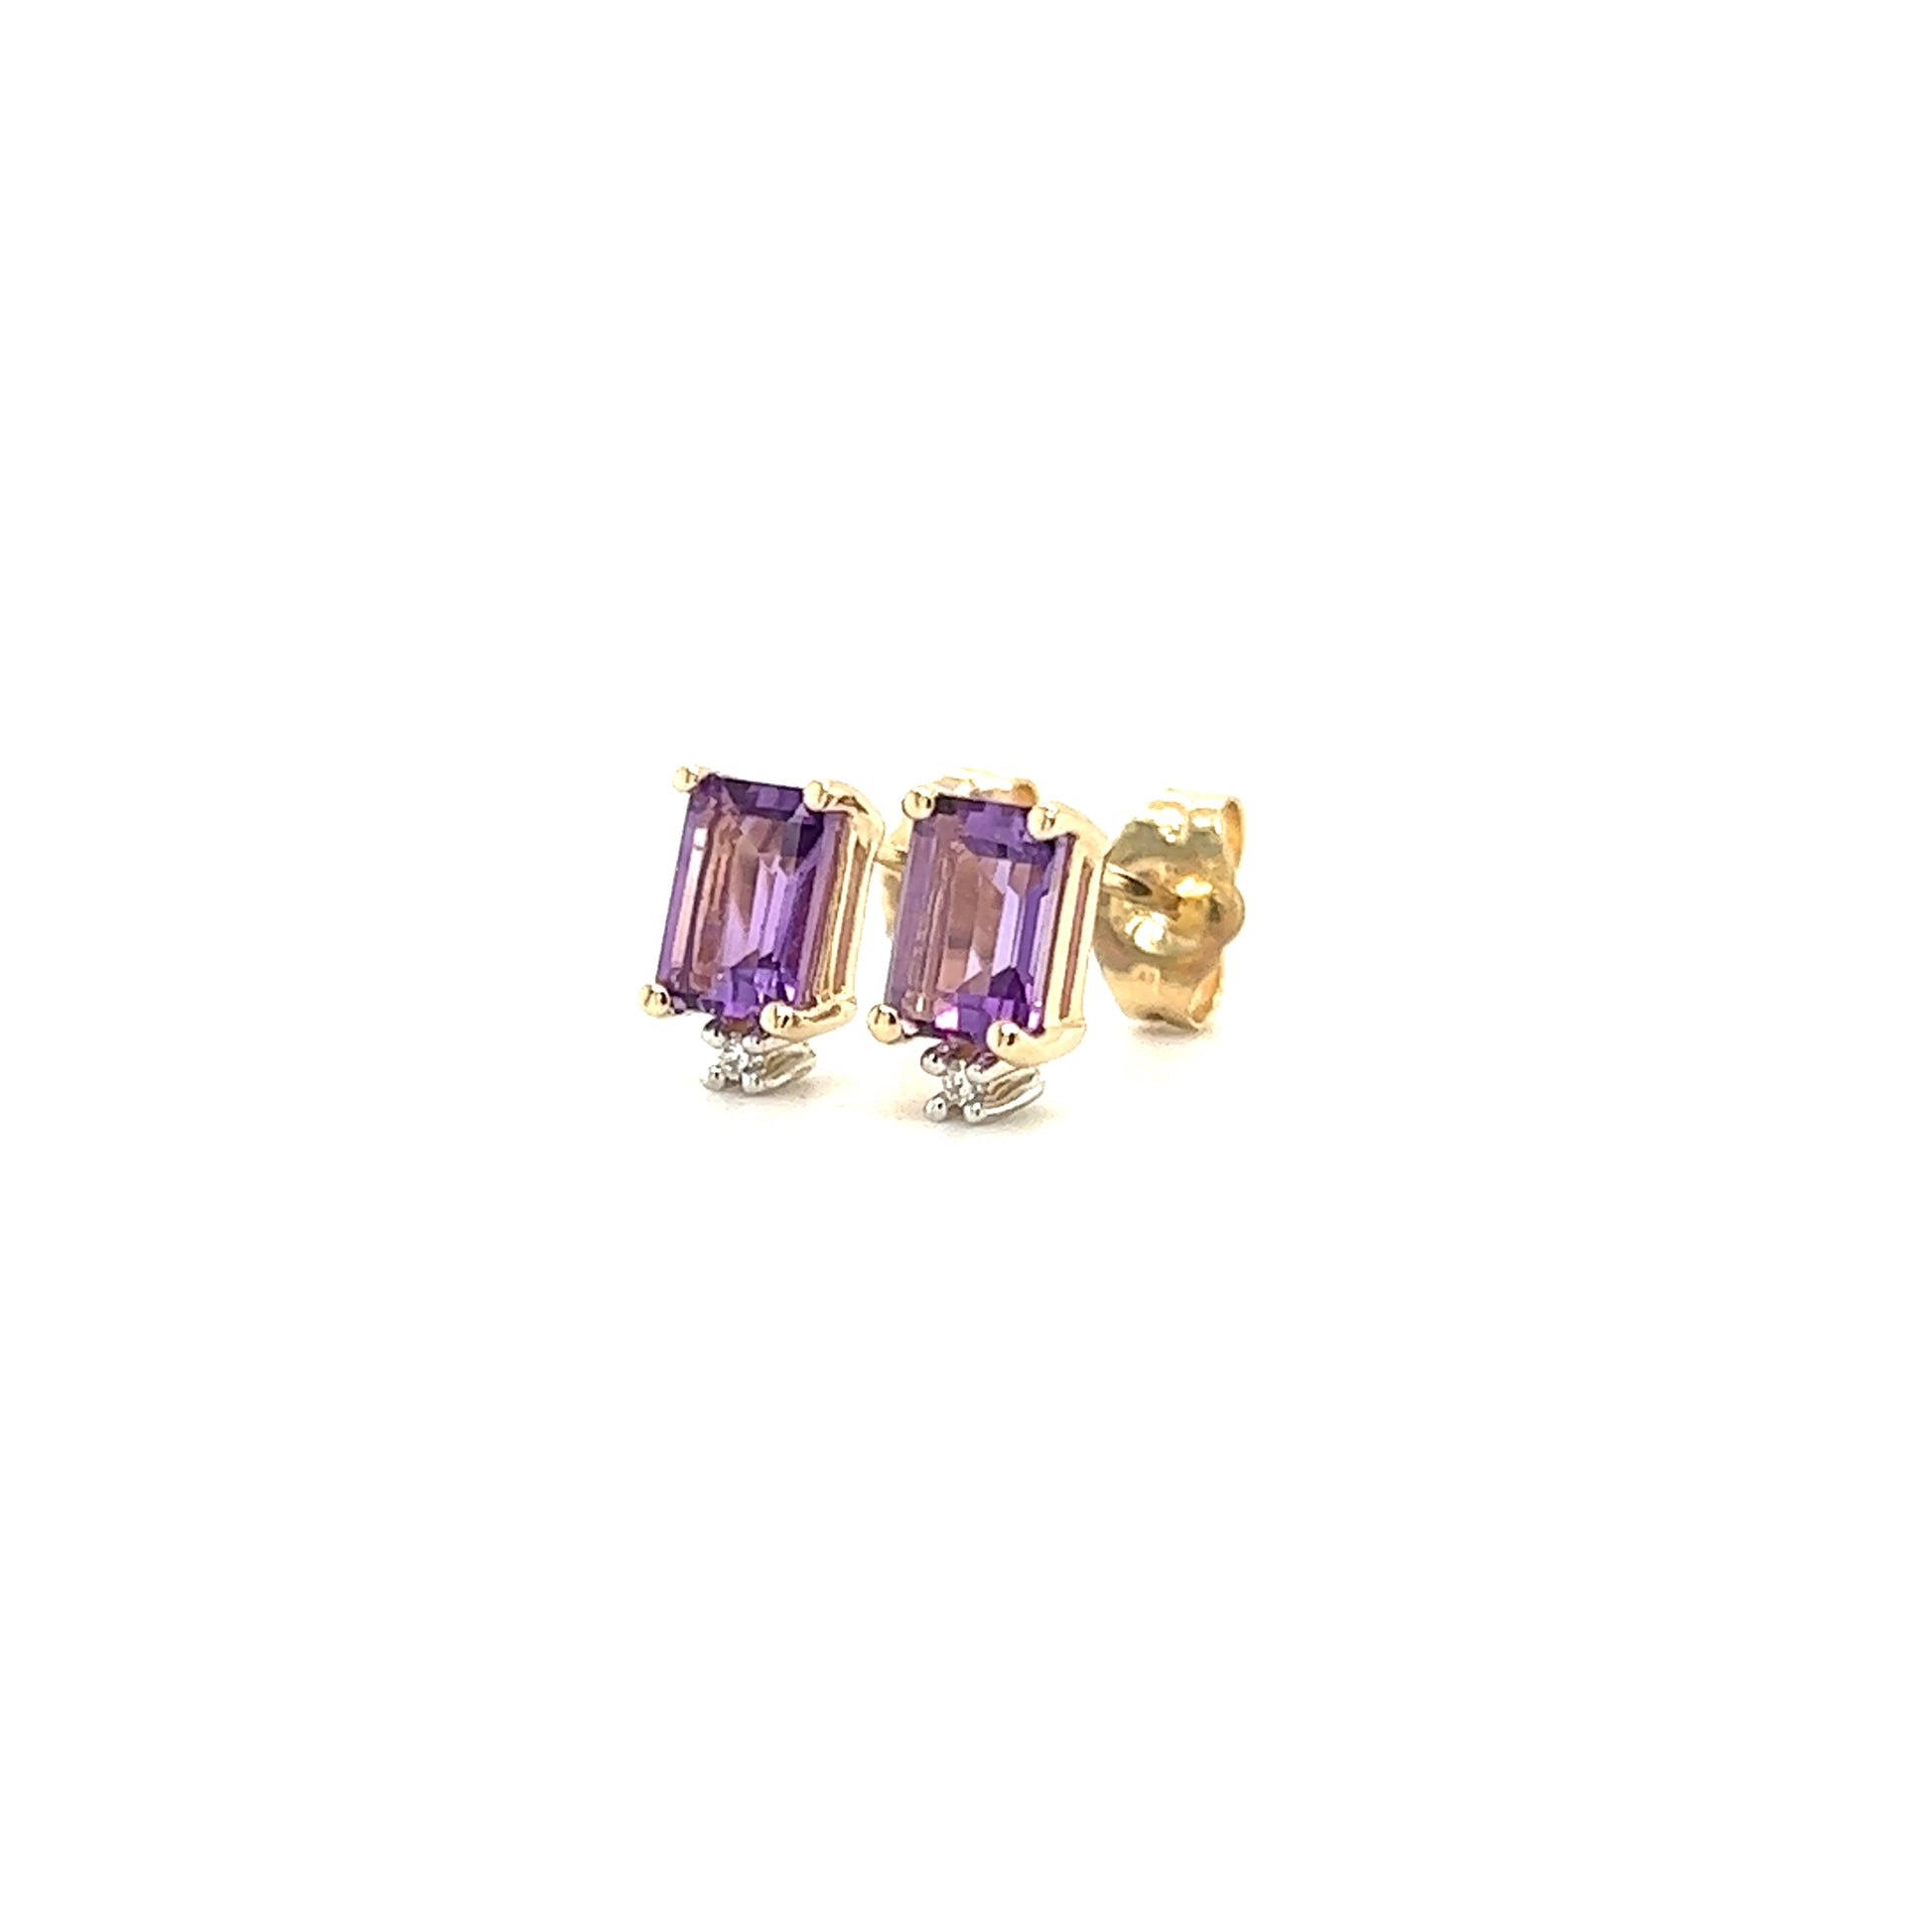 Baguette Amethyst Stud Earrings with Acent Diamonds in 14K Yellow Gold Right Side View